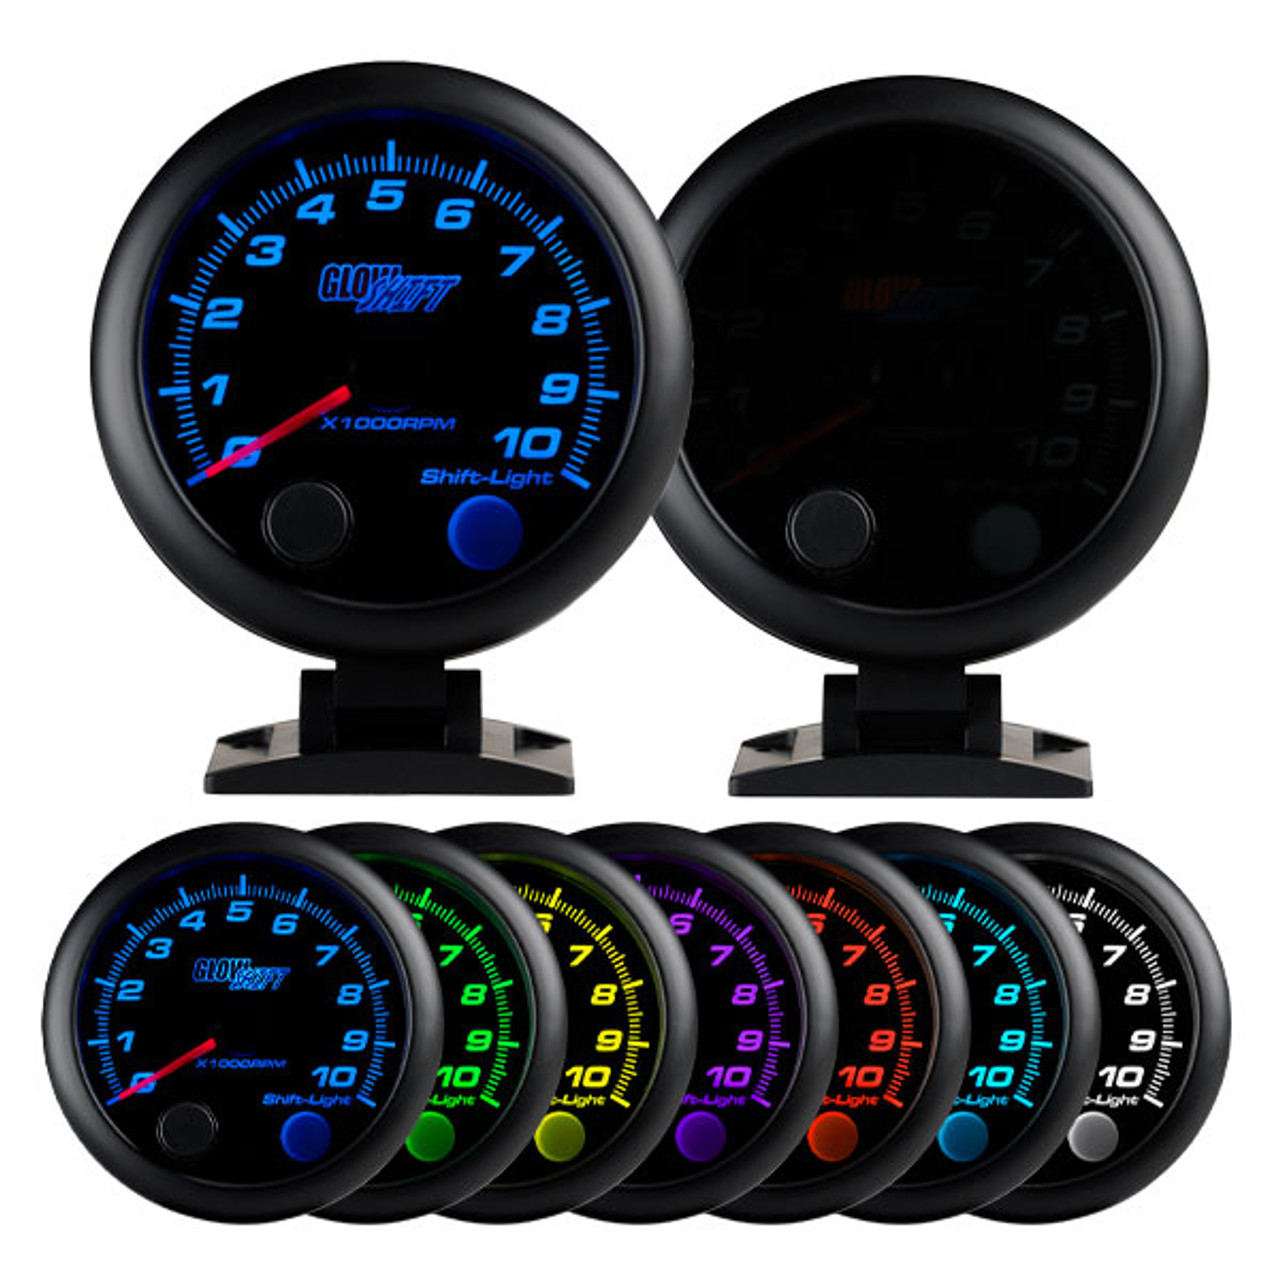 GlowShift Tinted 7 Color 3 4 Tachometer W Shift Light